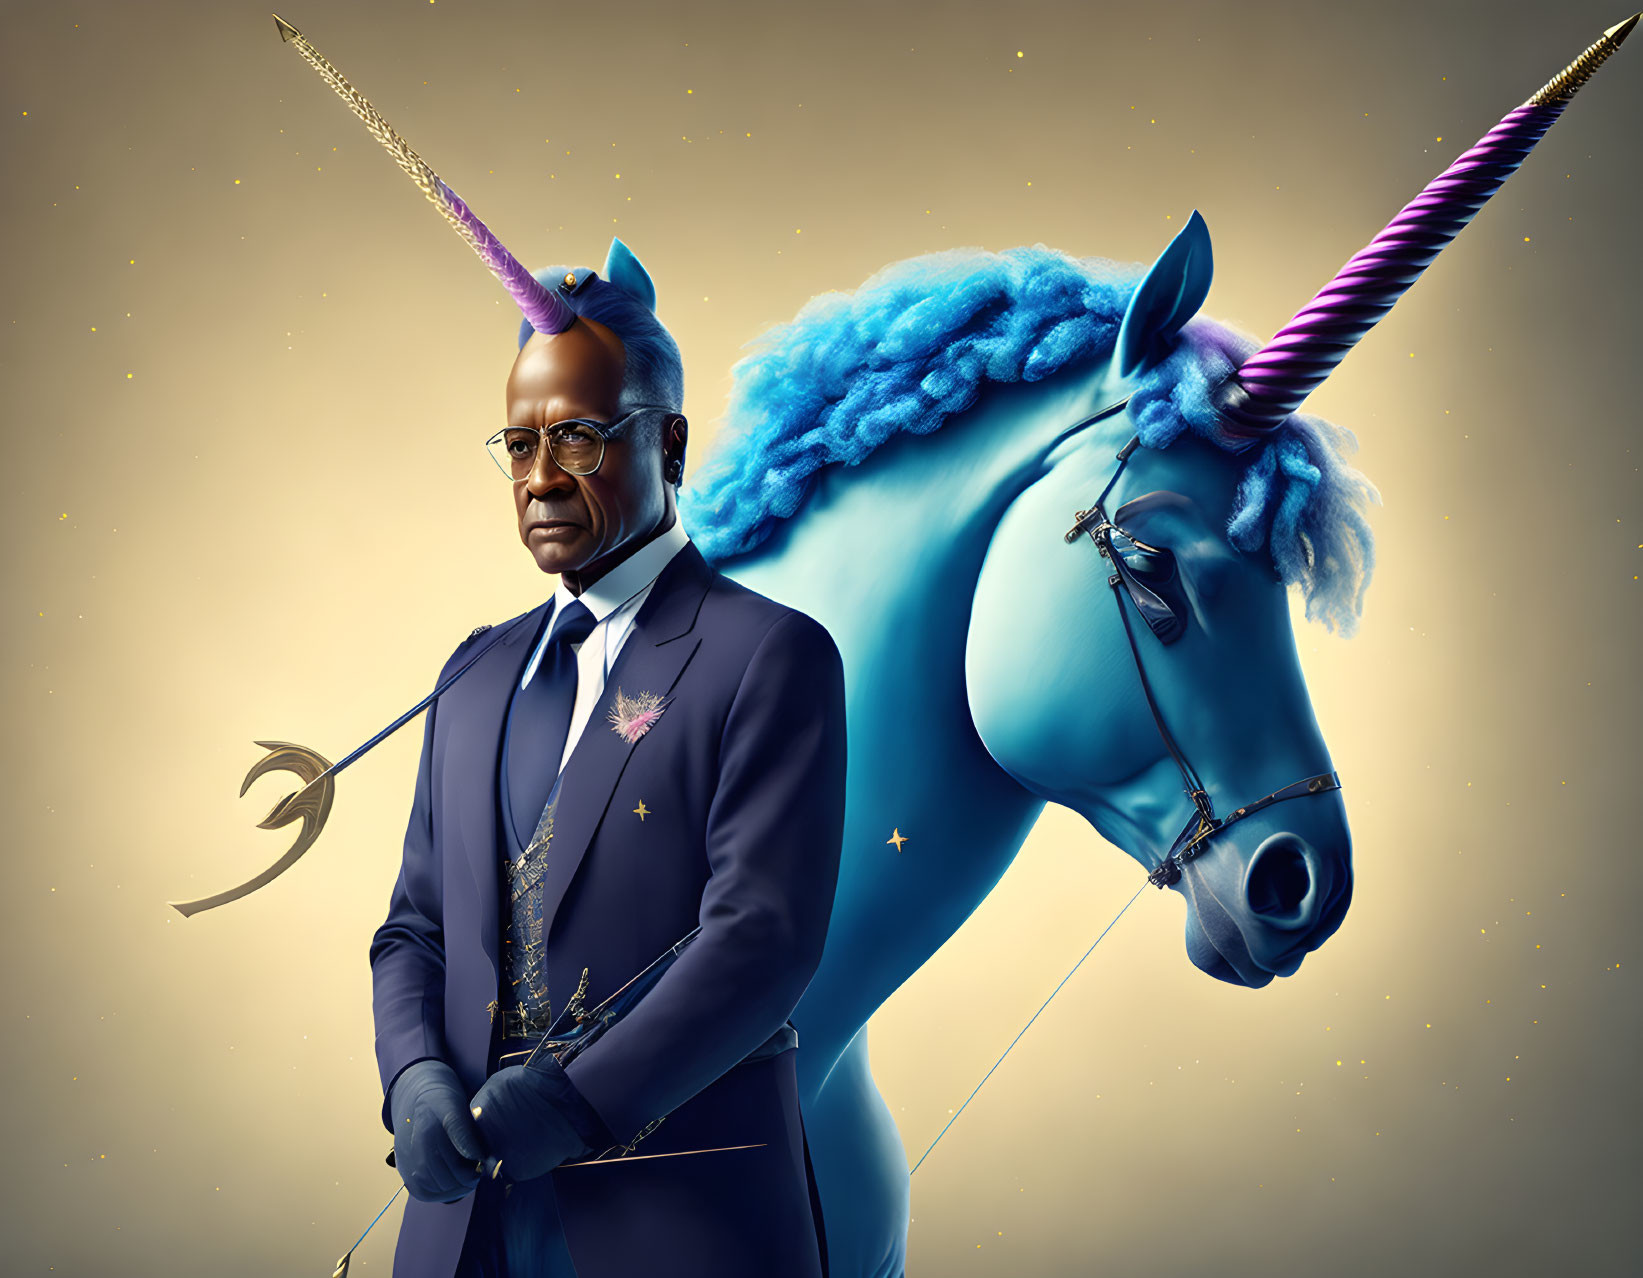 Surreal image: man in suit with unicorn head on golden backdrop